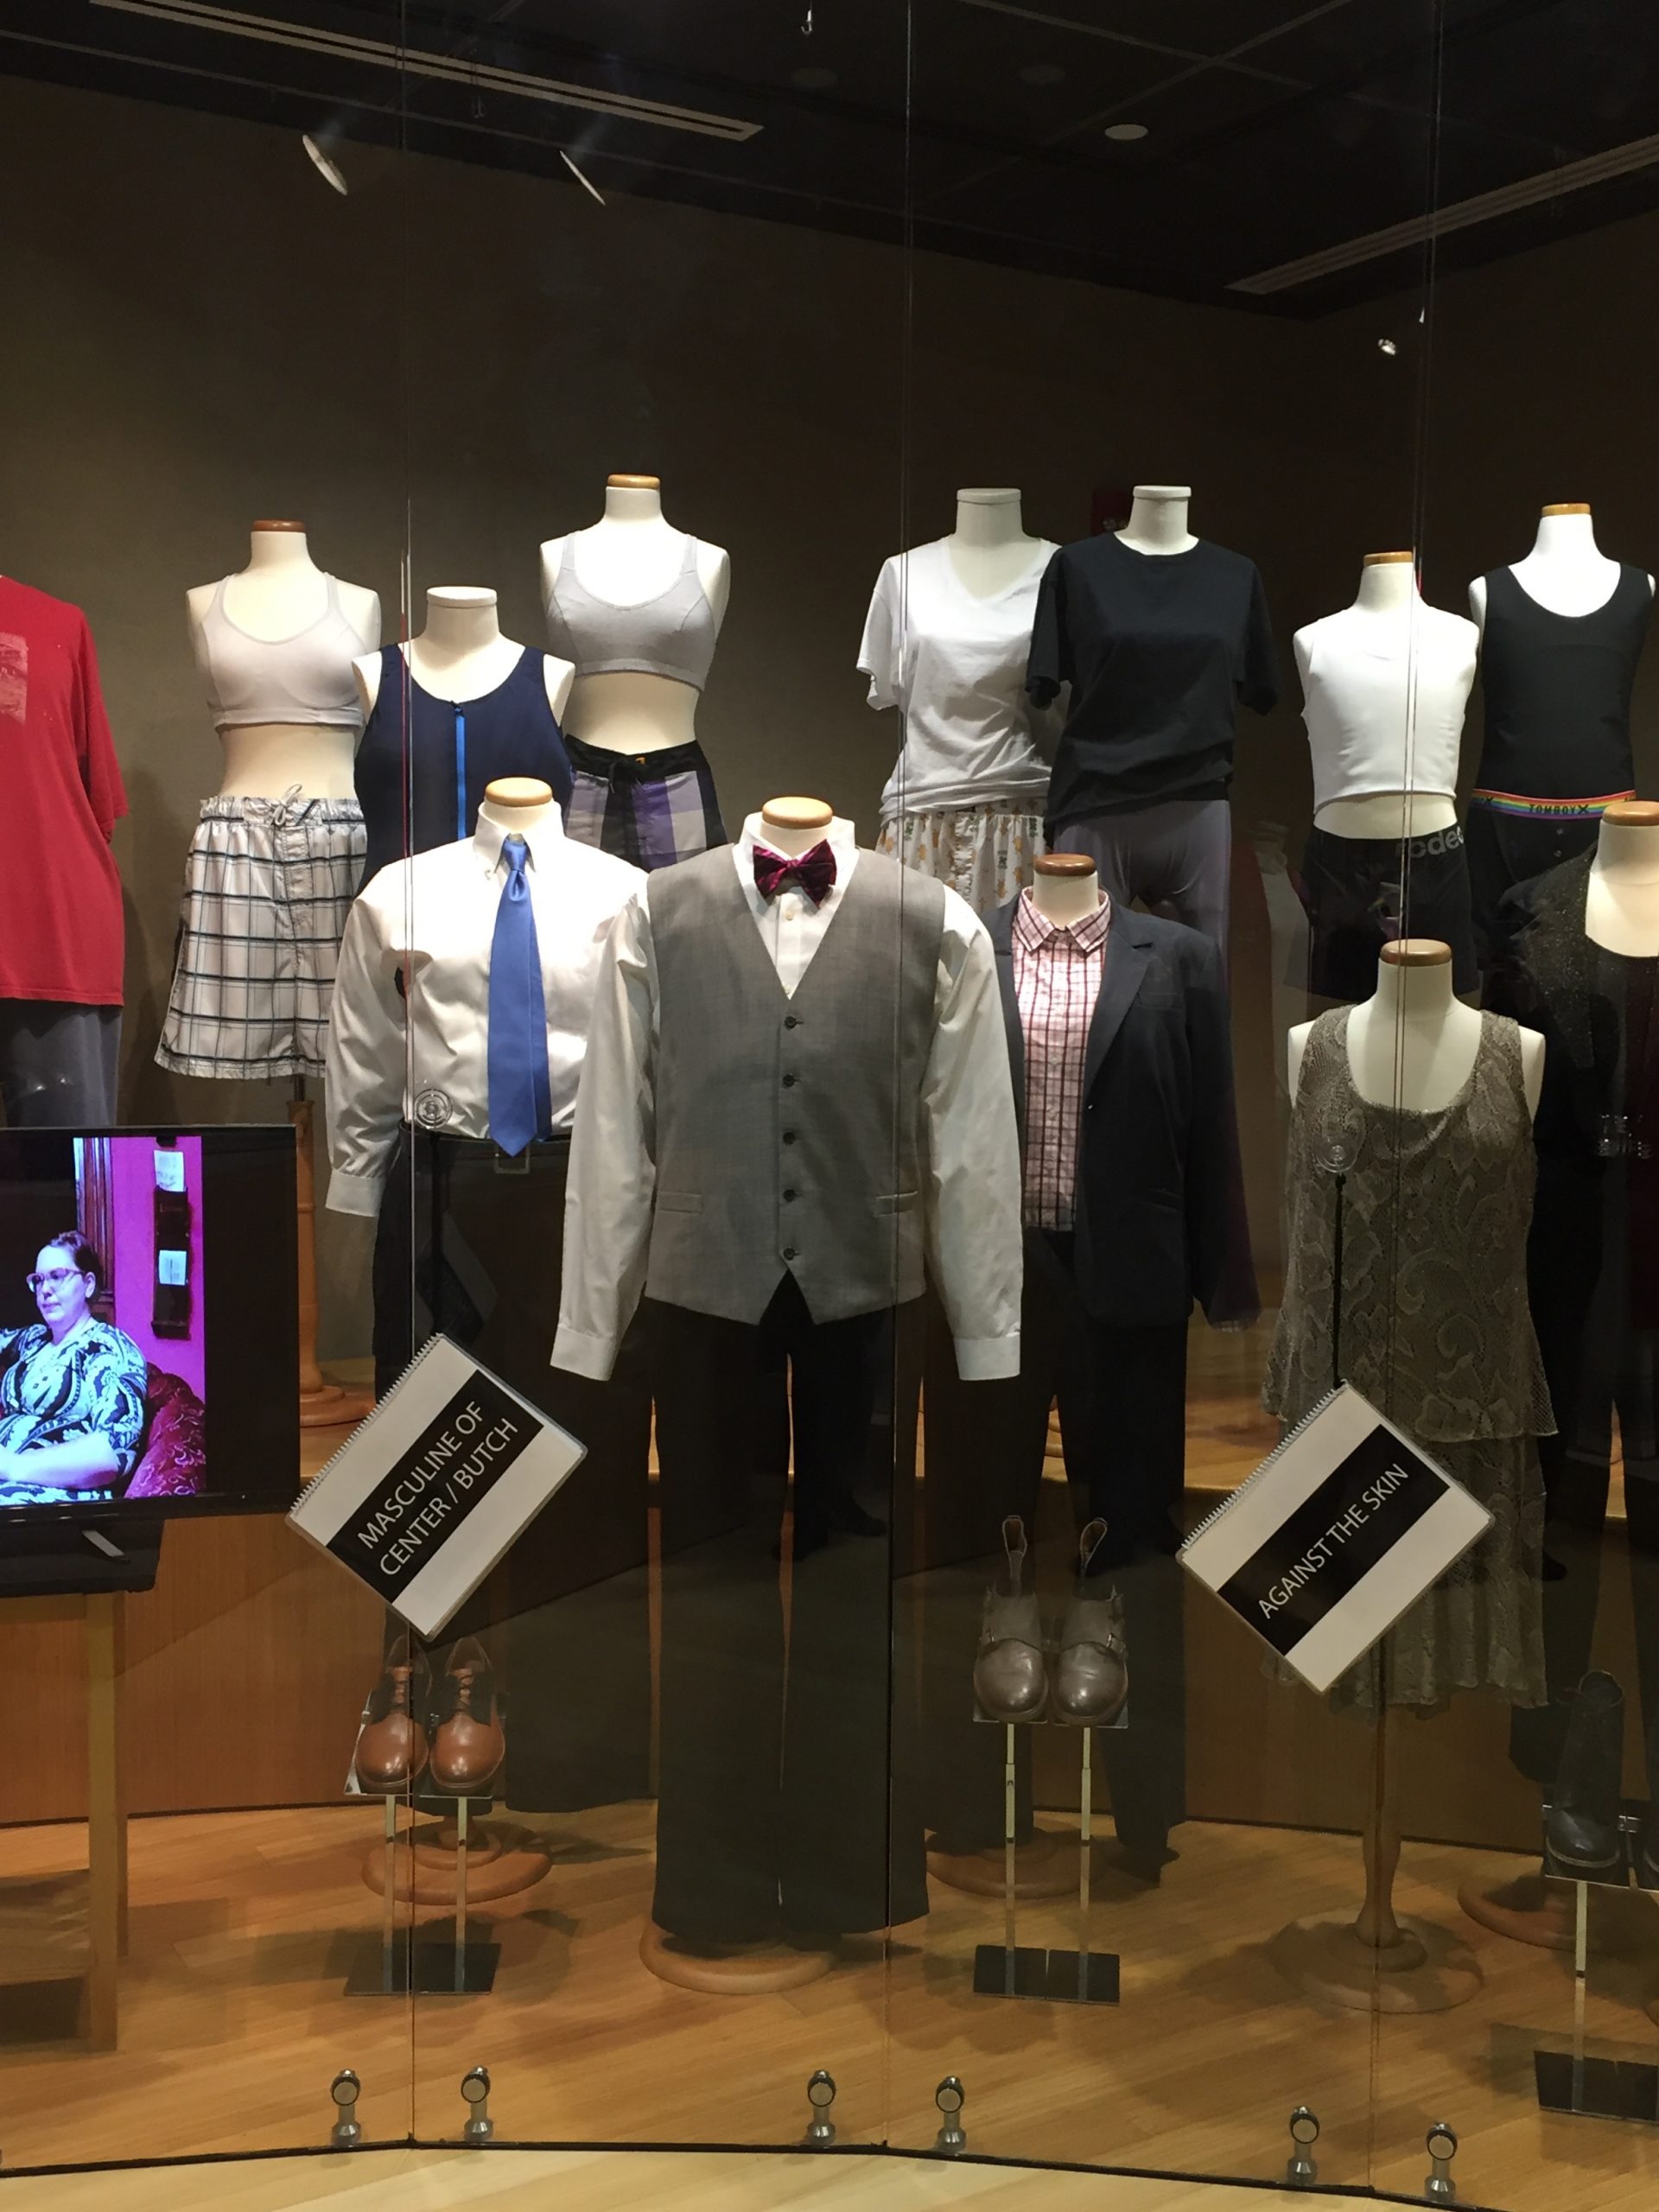 Garments from "Masculine of Center/Butch", "Against the Skin", and "Feminine Leaning/High Femme" vignettes